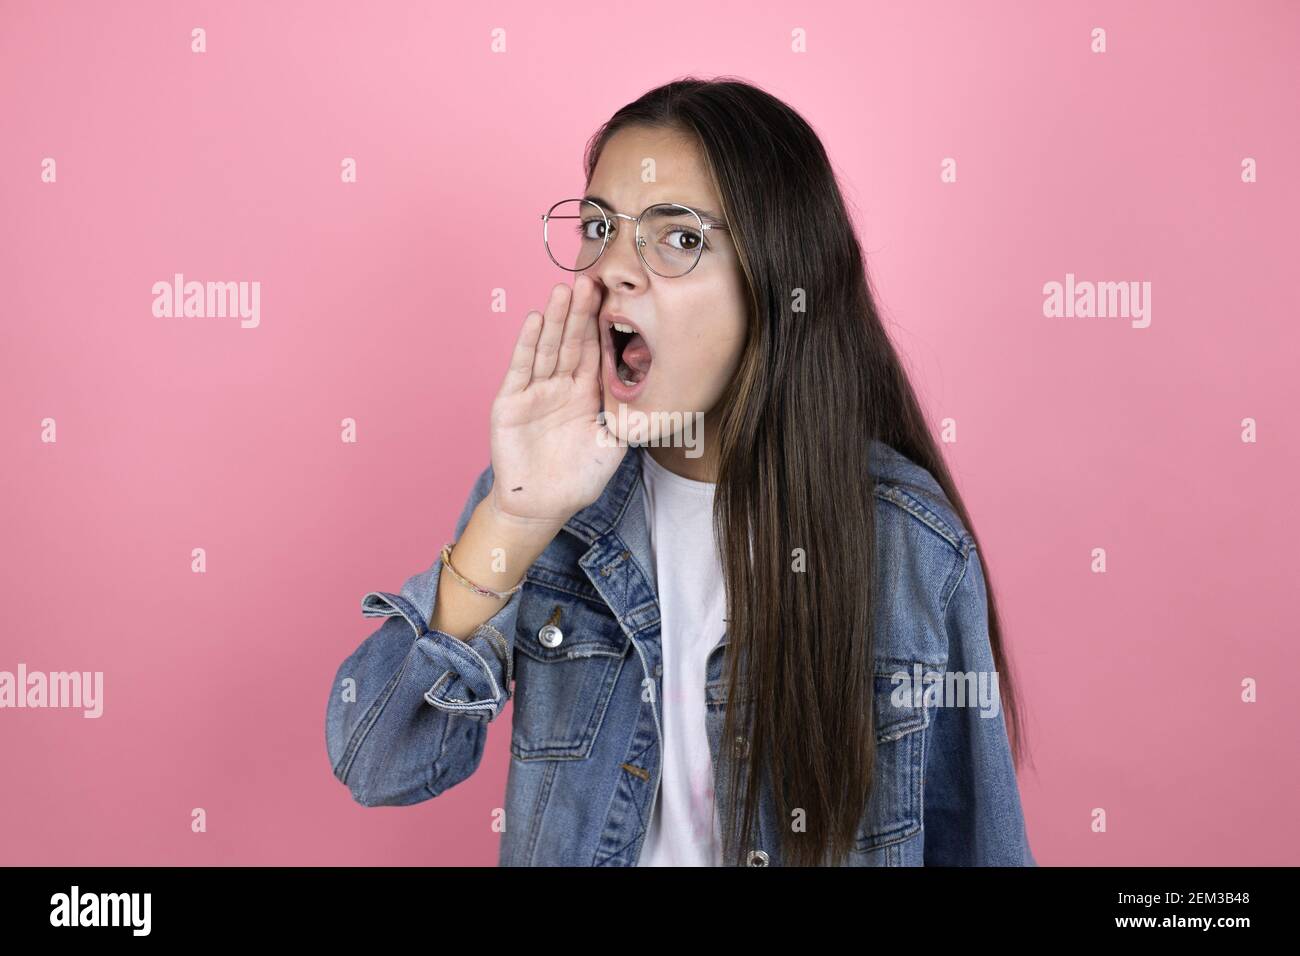 Beautiful child girl with long hair wearing a denim jacket standing over isolated pink background shouting and screaming loud to side with hand on mou Stock Photo